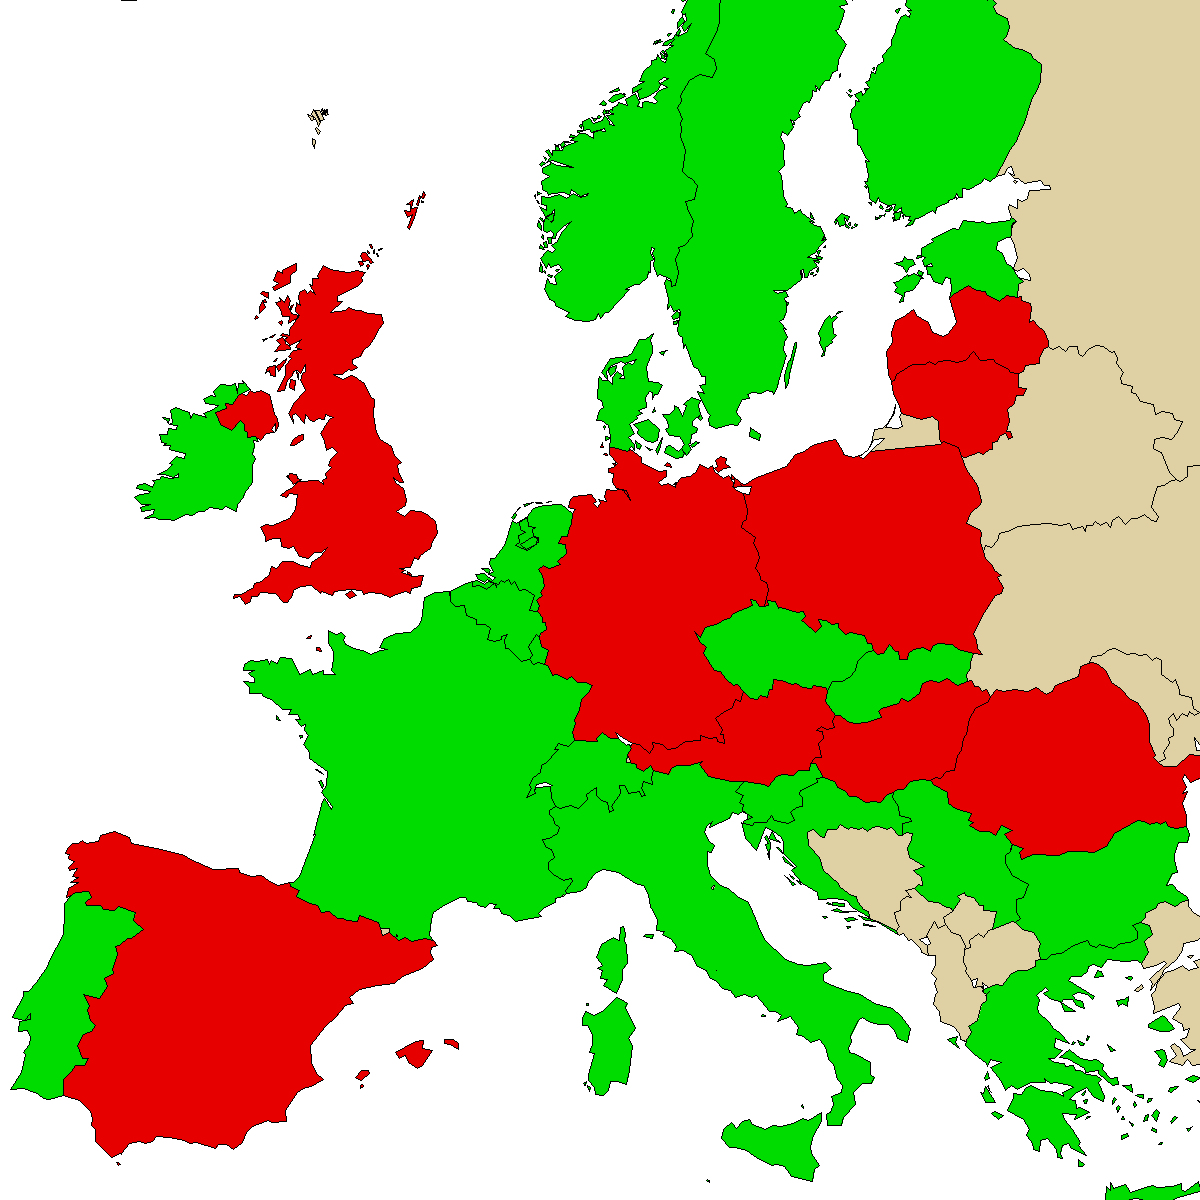 legal info map for our product Mephedrene, green are countries with no ban, red with ban, grey is unknown